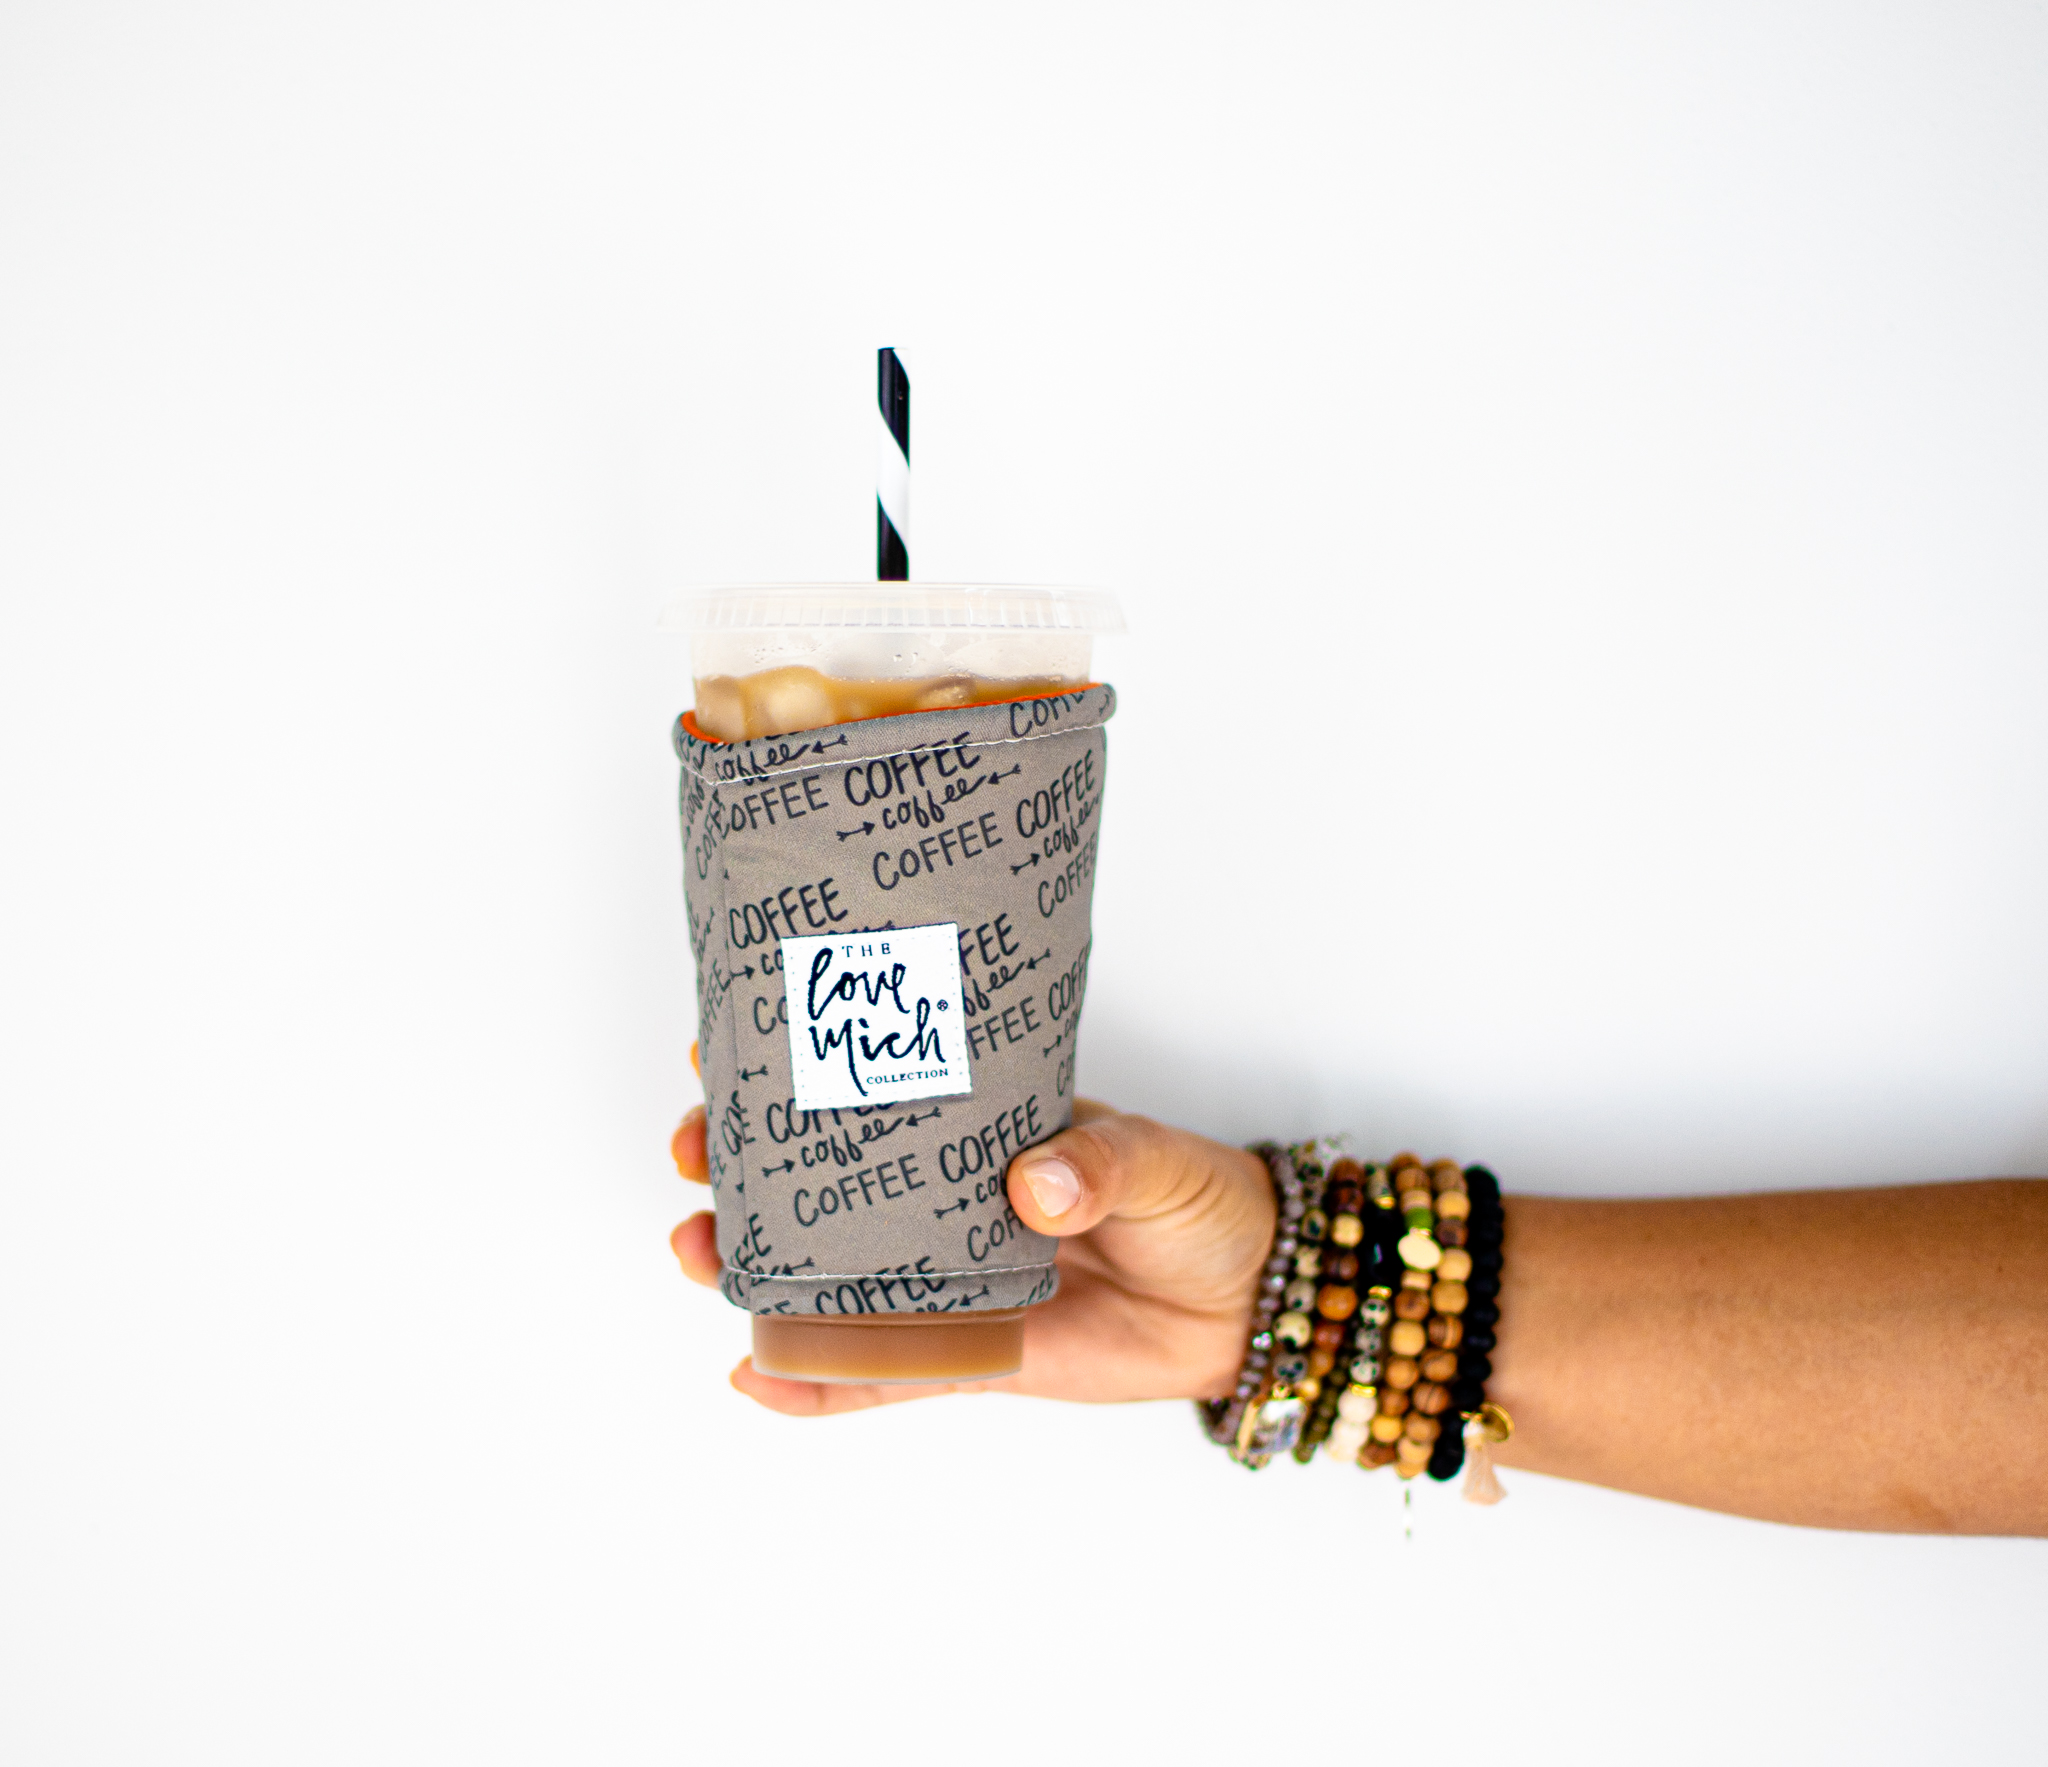 These Coffee Cozies are not only stylish and eye-catching but work to keep iced coffees cold!